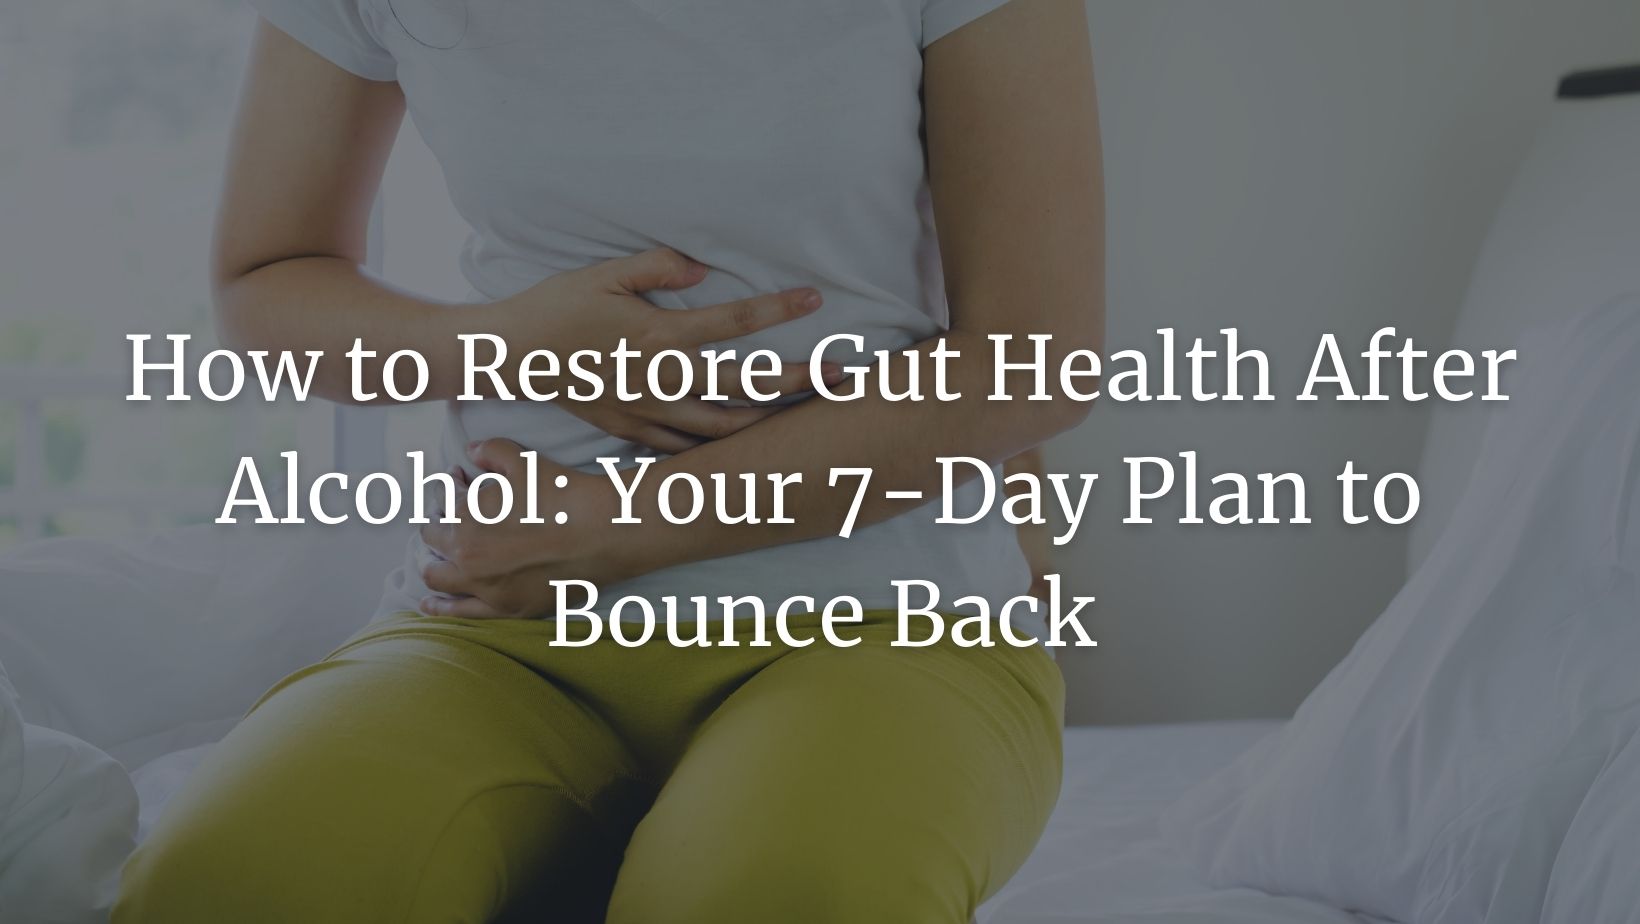 How to restore gut health after alcohol featured image